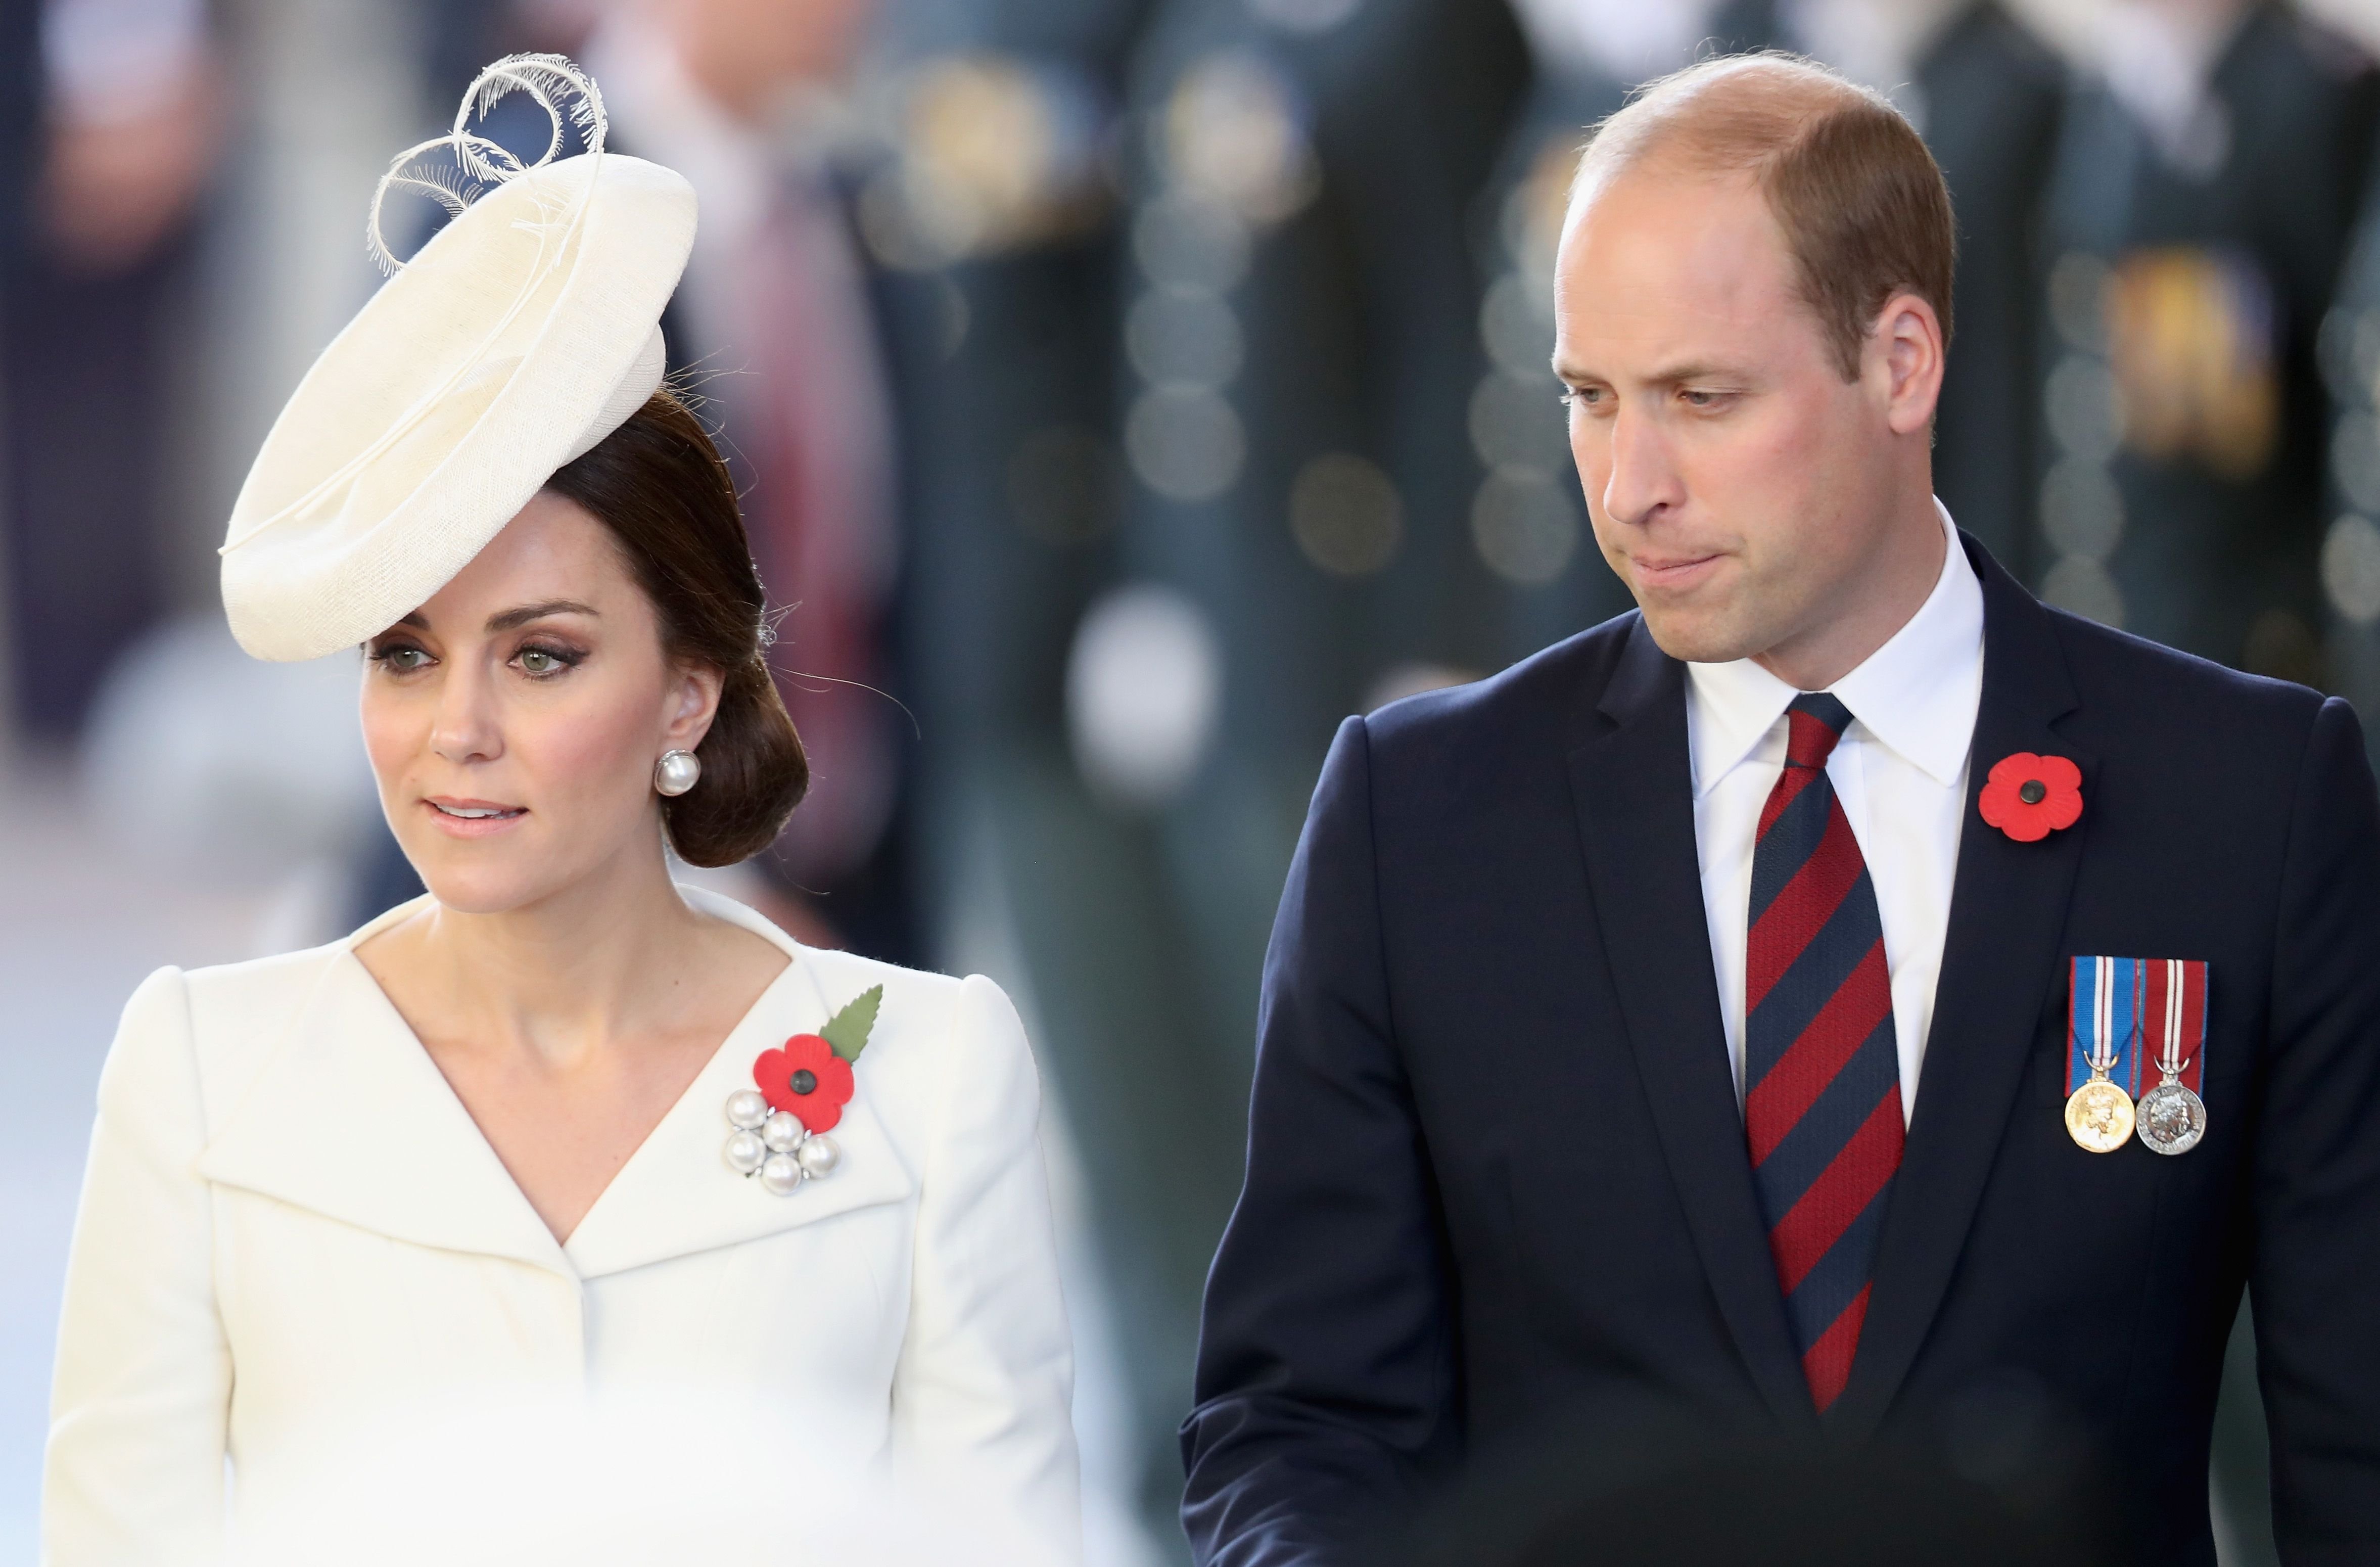 Prince William and Kate Middleton at the Last Post ceremony at the Commonwealth War Graves Commission Ypres (Menin Gate) Memorial on July 30, 2017 | Photo: Getty Images